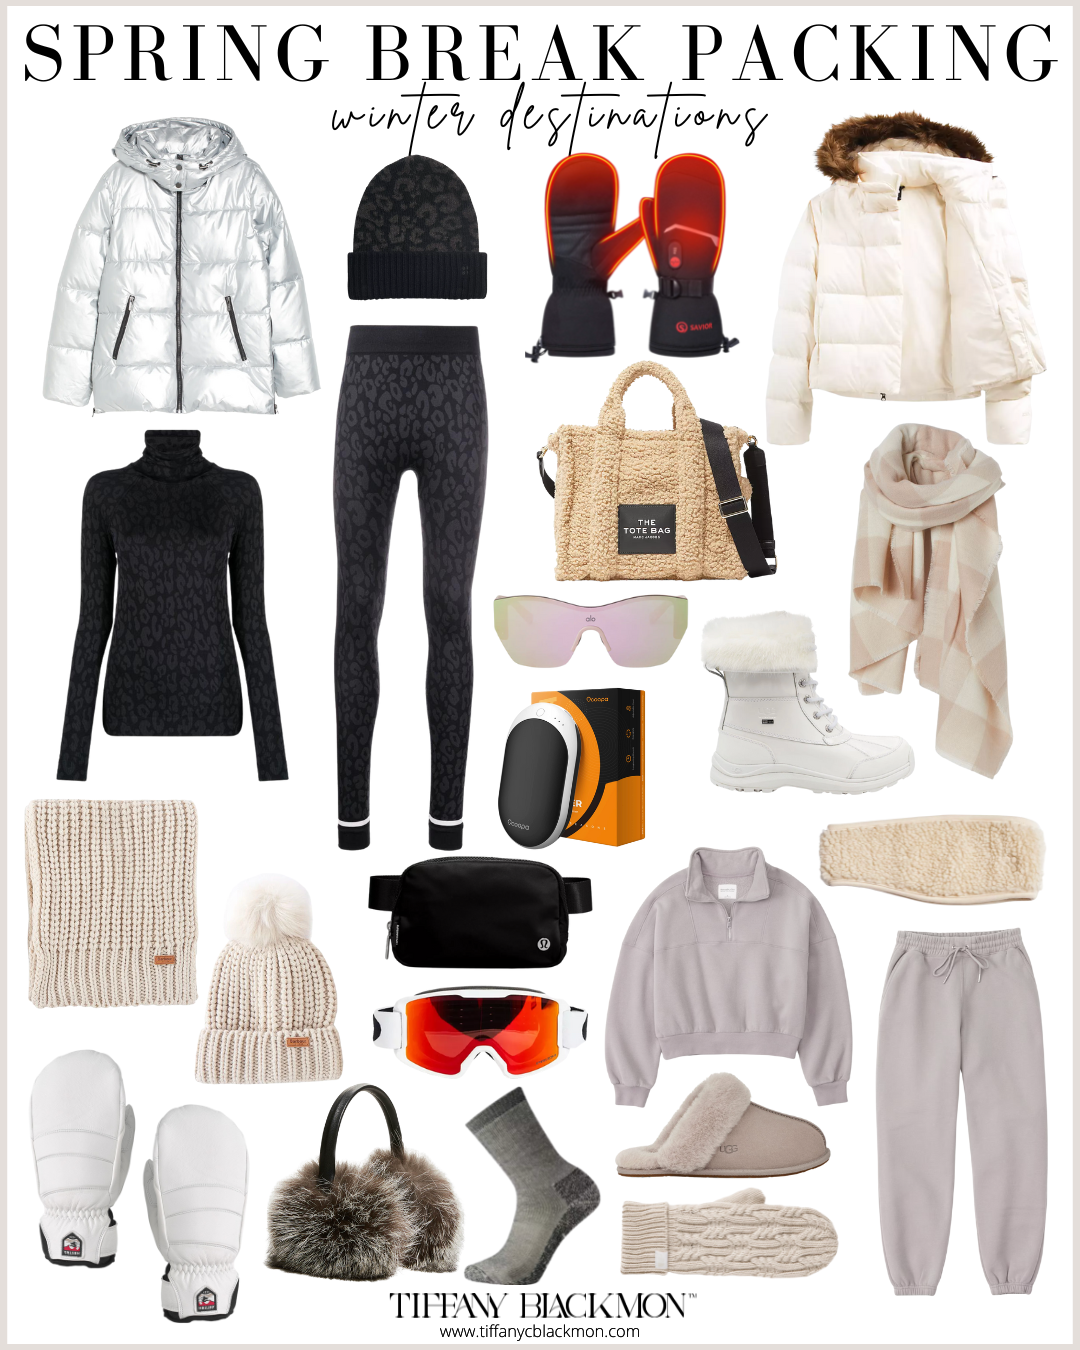 Spring Break Packing: Winter Destinations
#skiing #coldweather #skiinggear #gloves #beanie #coat #sweats #baselayers #boots #scarf #beltbag #goggles #ski